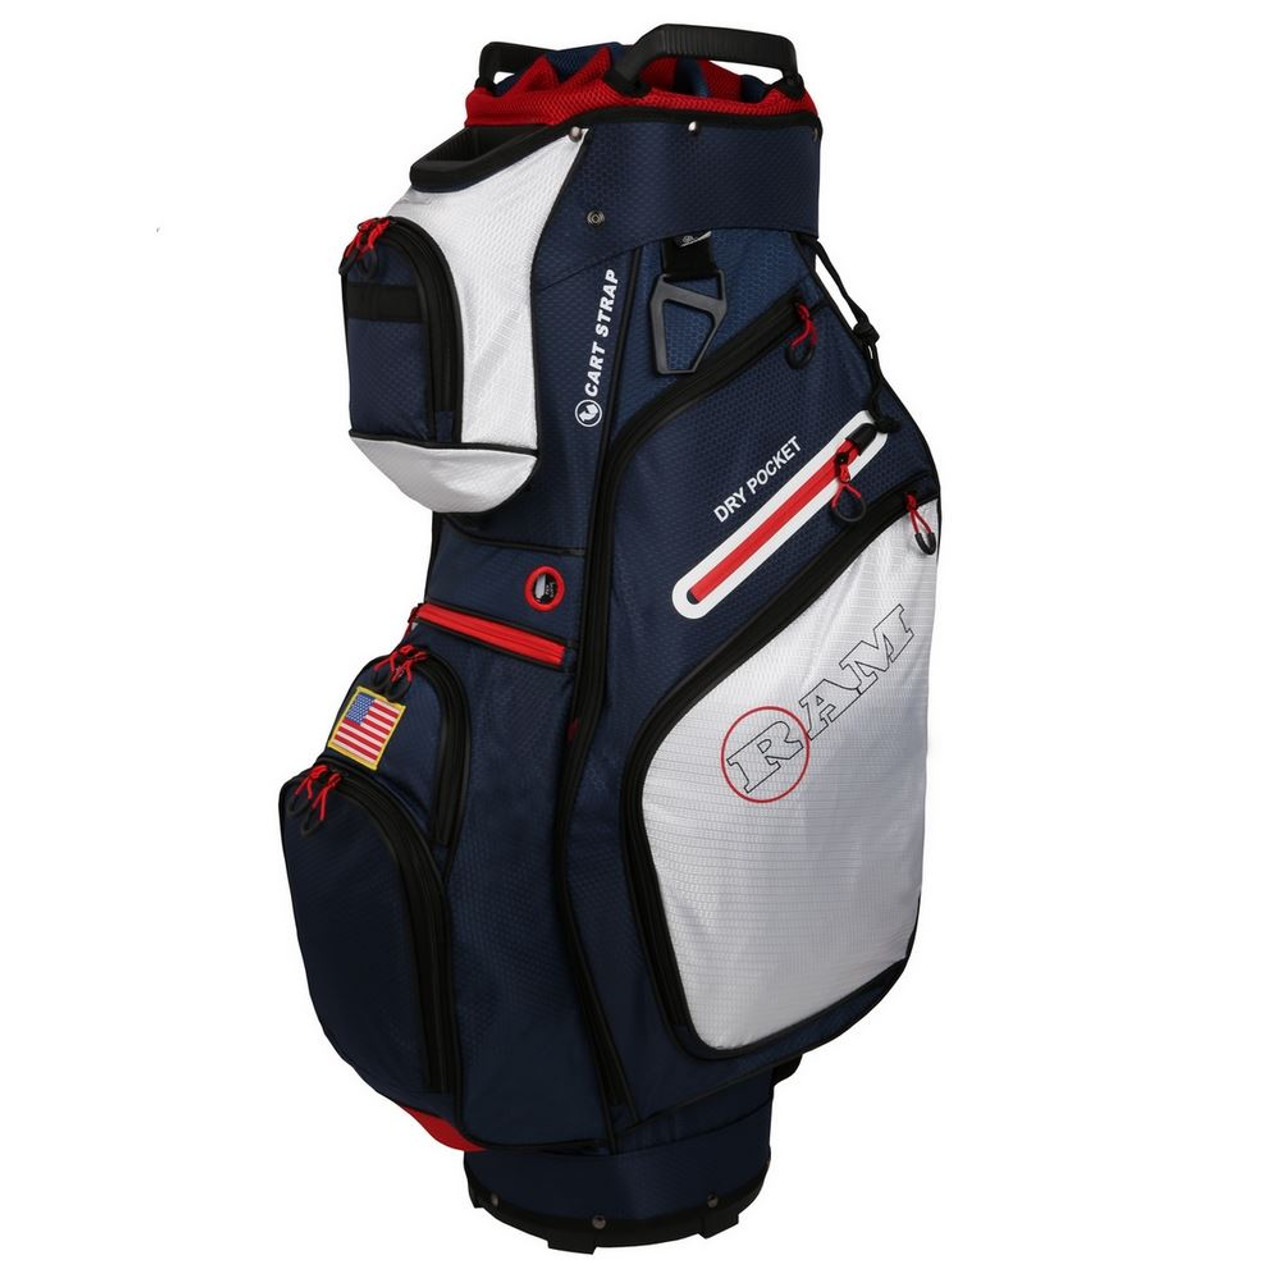 Ram Golf FX Deluxe Golf Bag with 14 Way Dividers USA Flag - RamGolf.com